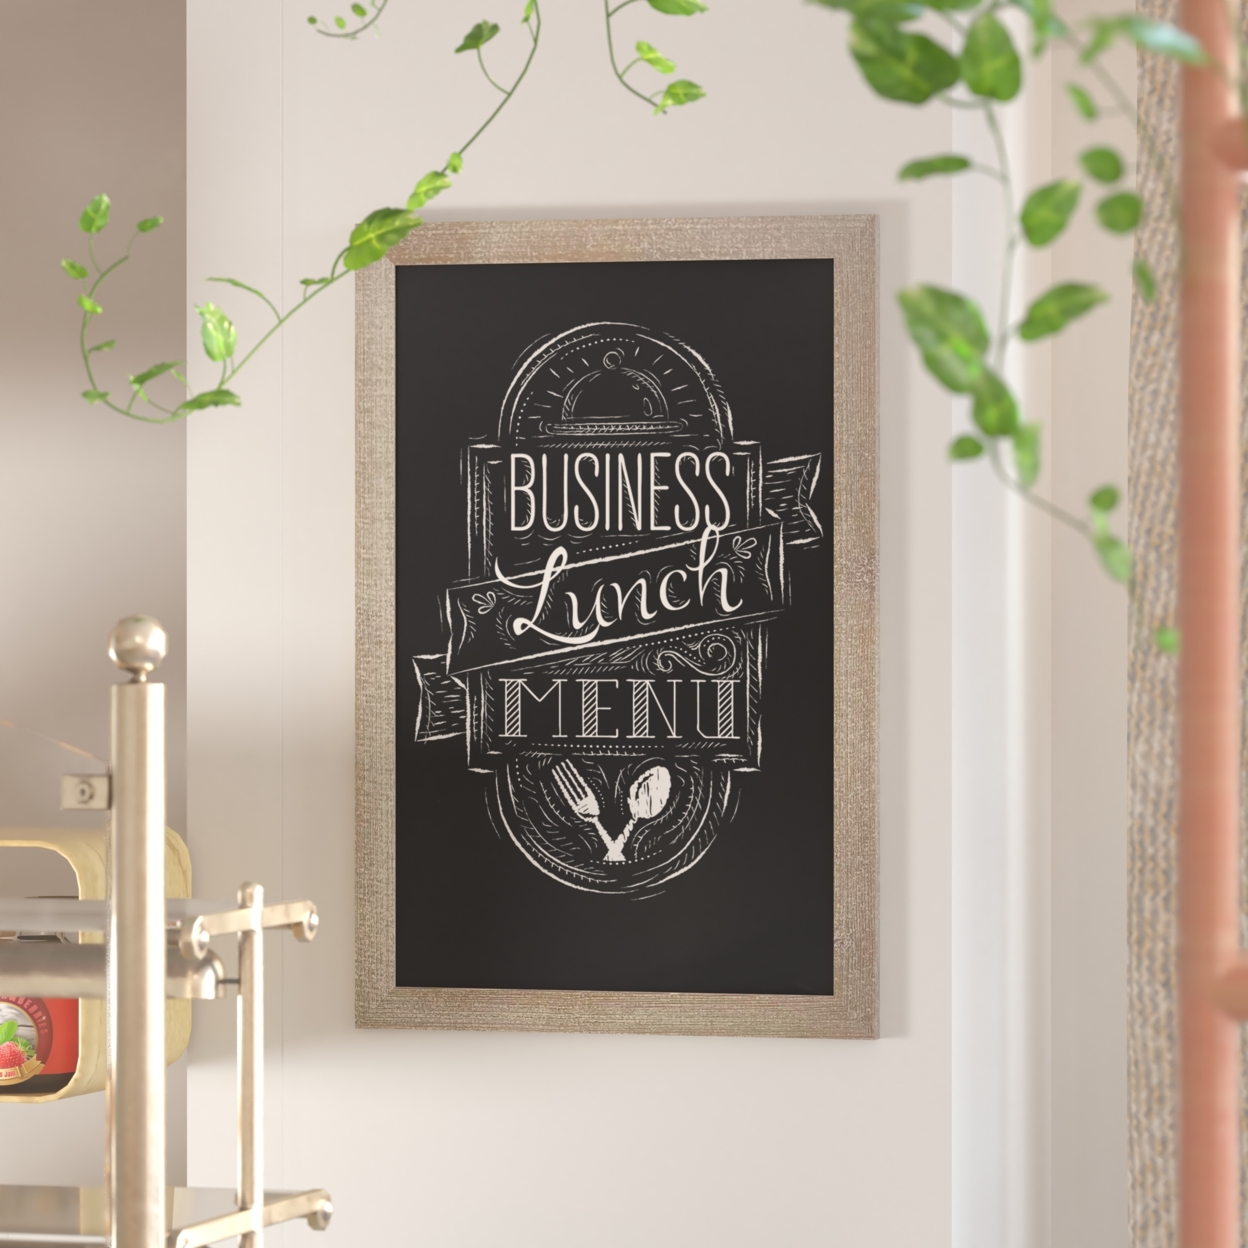 Wall Hanging Chalkboard, Weathered Wood Frame, Rough Hewn Texture